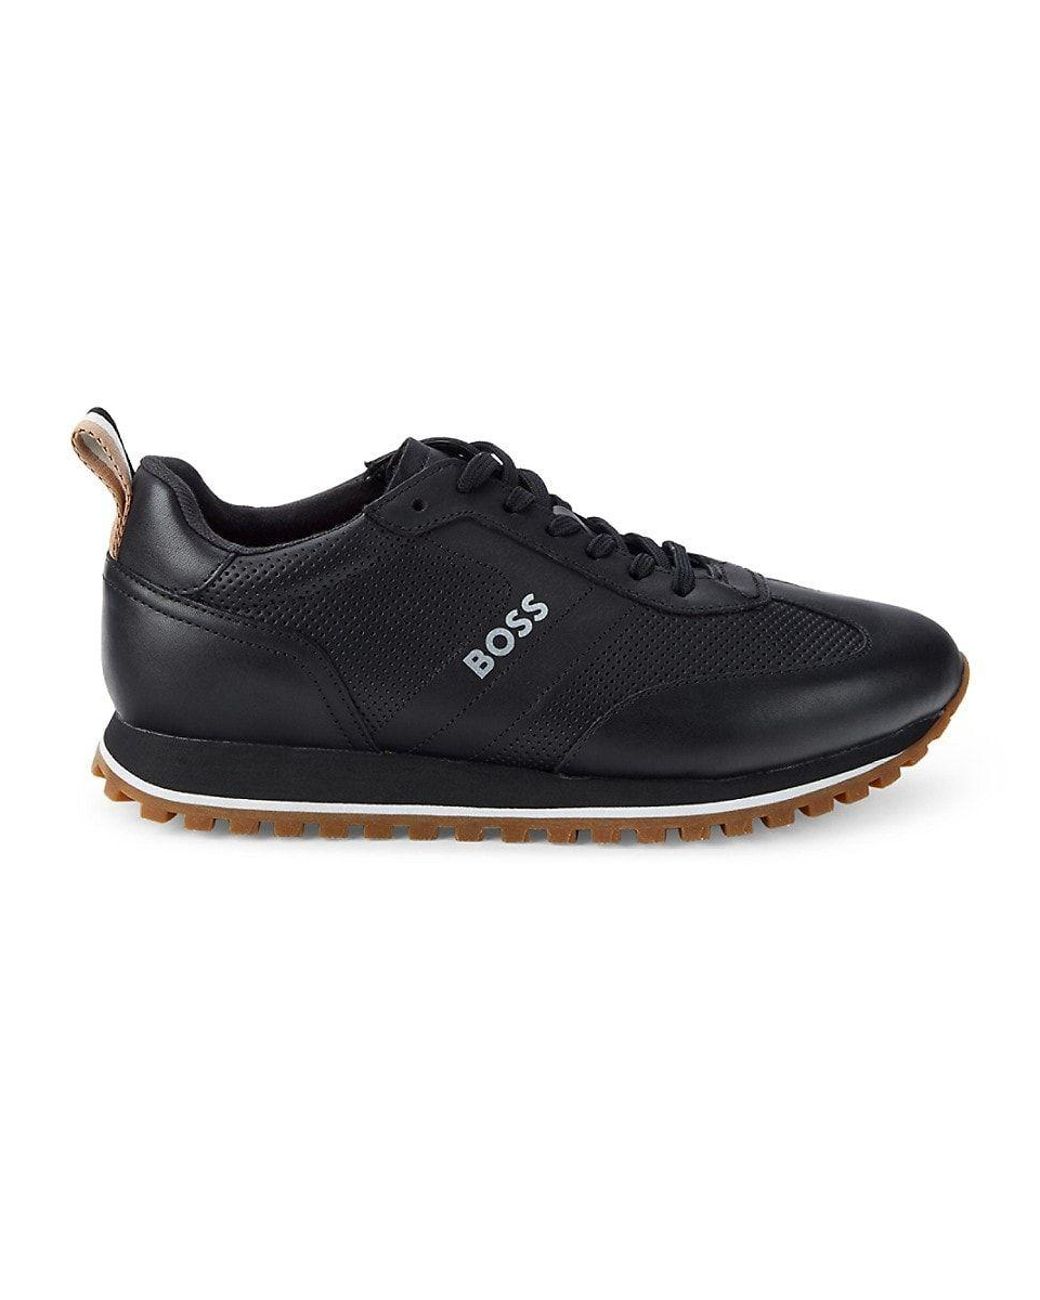 BOSS by HUGO BOSS Parkour Perforated Leather Sneakers in Black for Men ...